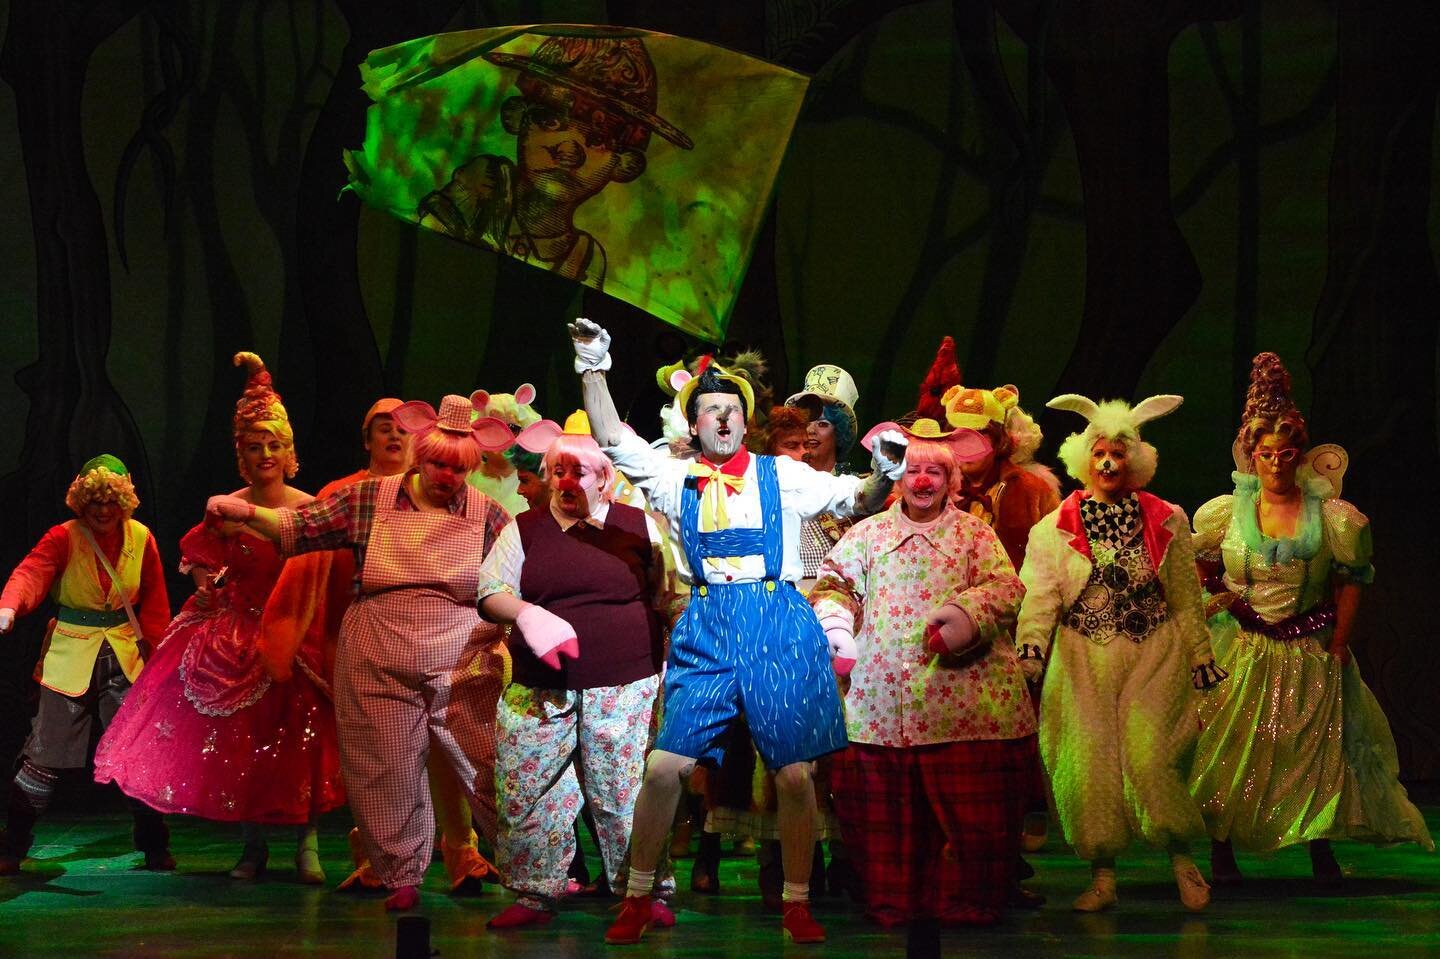 Best of luck to Shrek the Musical at the Theatre Royal Nottingham for their final show day !